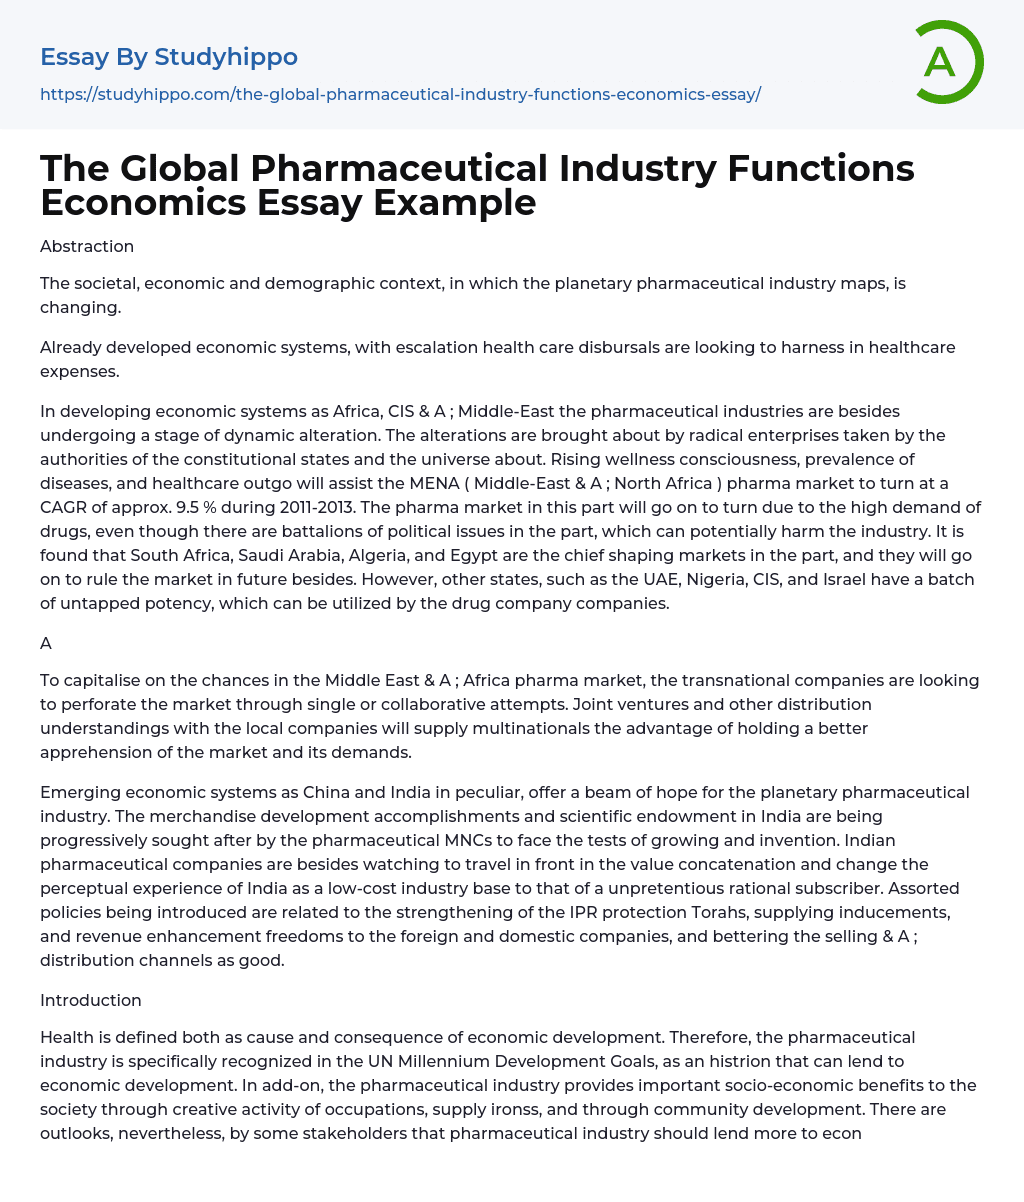 The Global Pharmaceutical Industry Functions Economics Essay Example